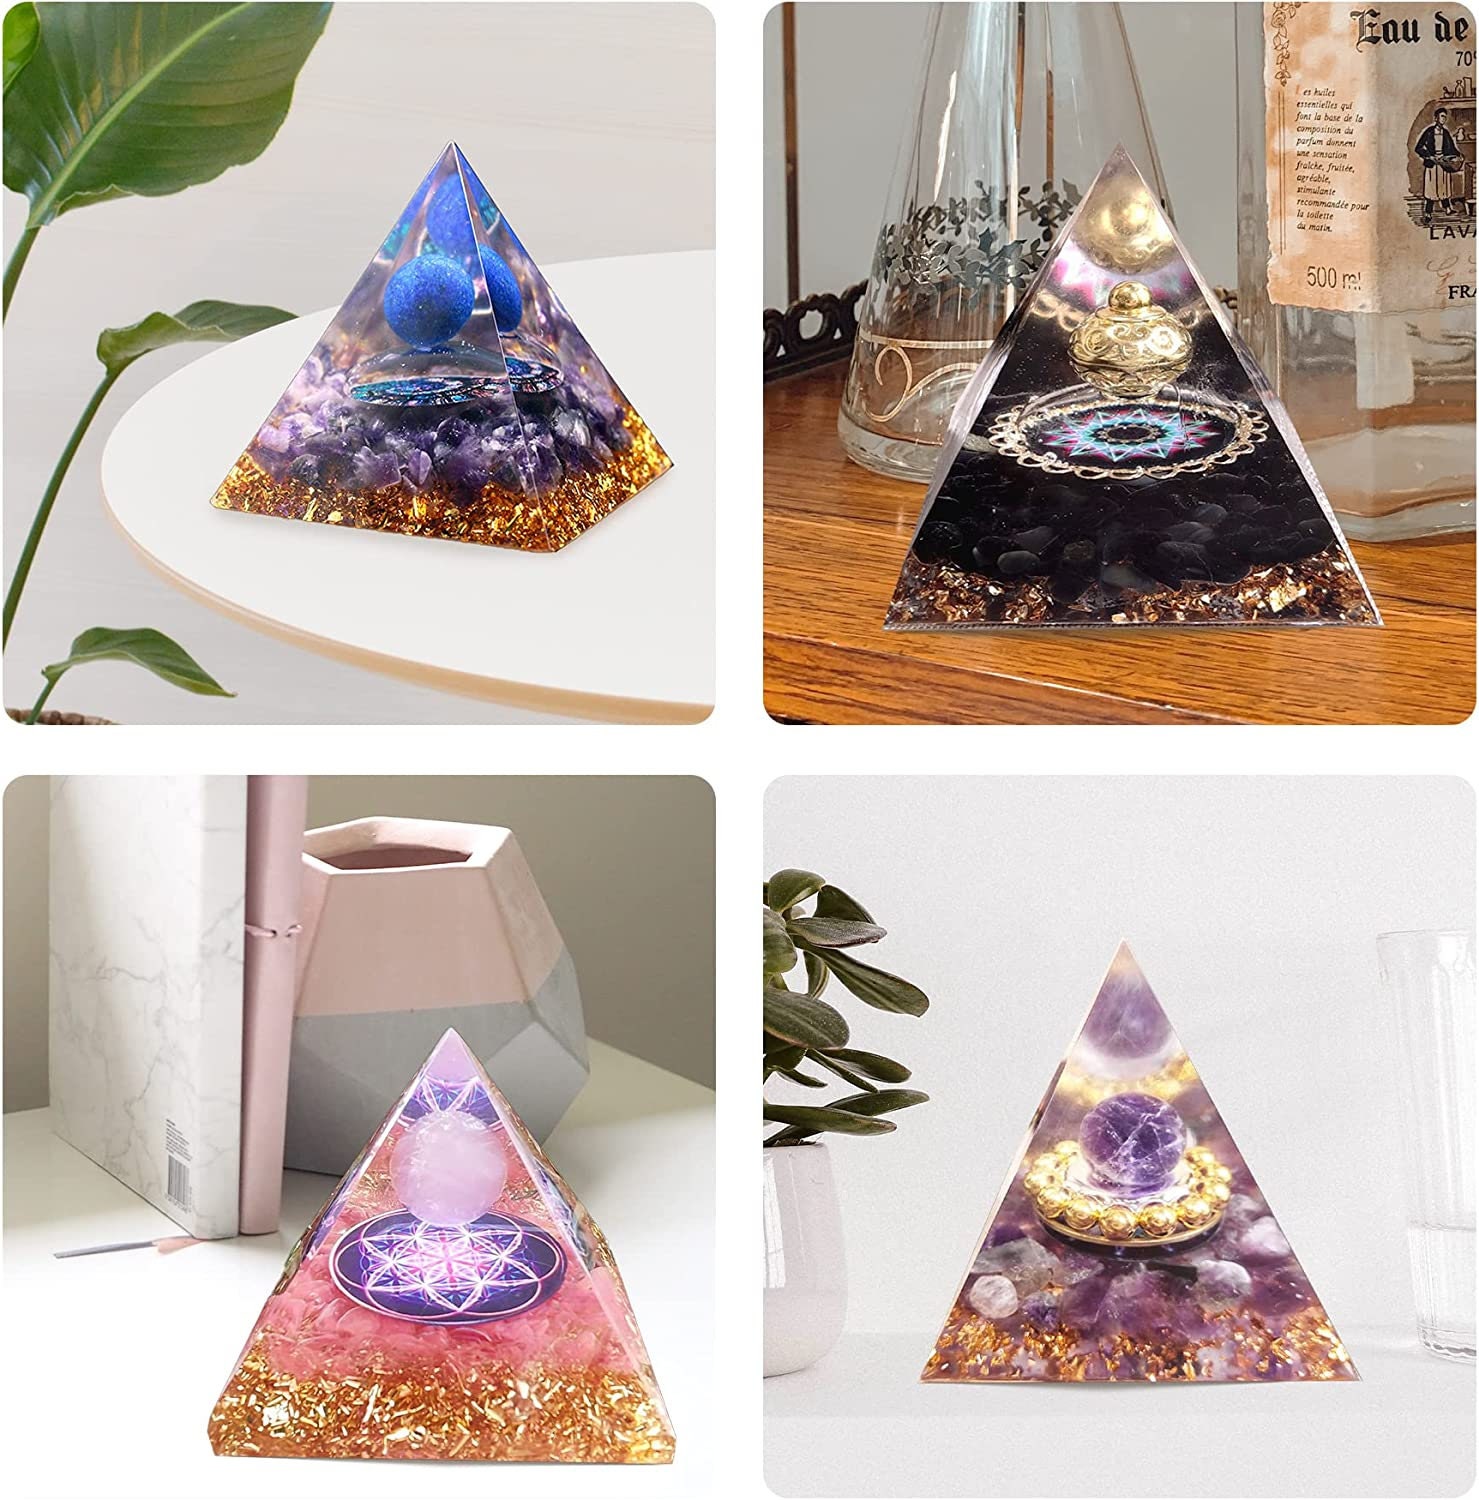 DIY Super Large Pyramid Silicone Mold Resin Craft Jewelry Making Mold  Plastic Frame 15cm/5.9 Transparent with Scale